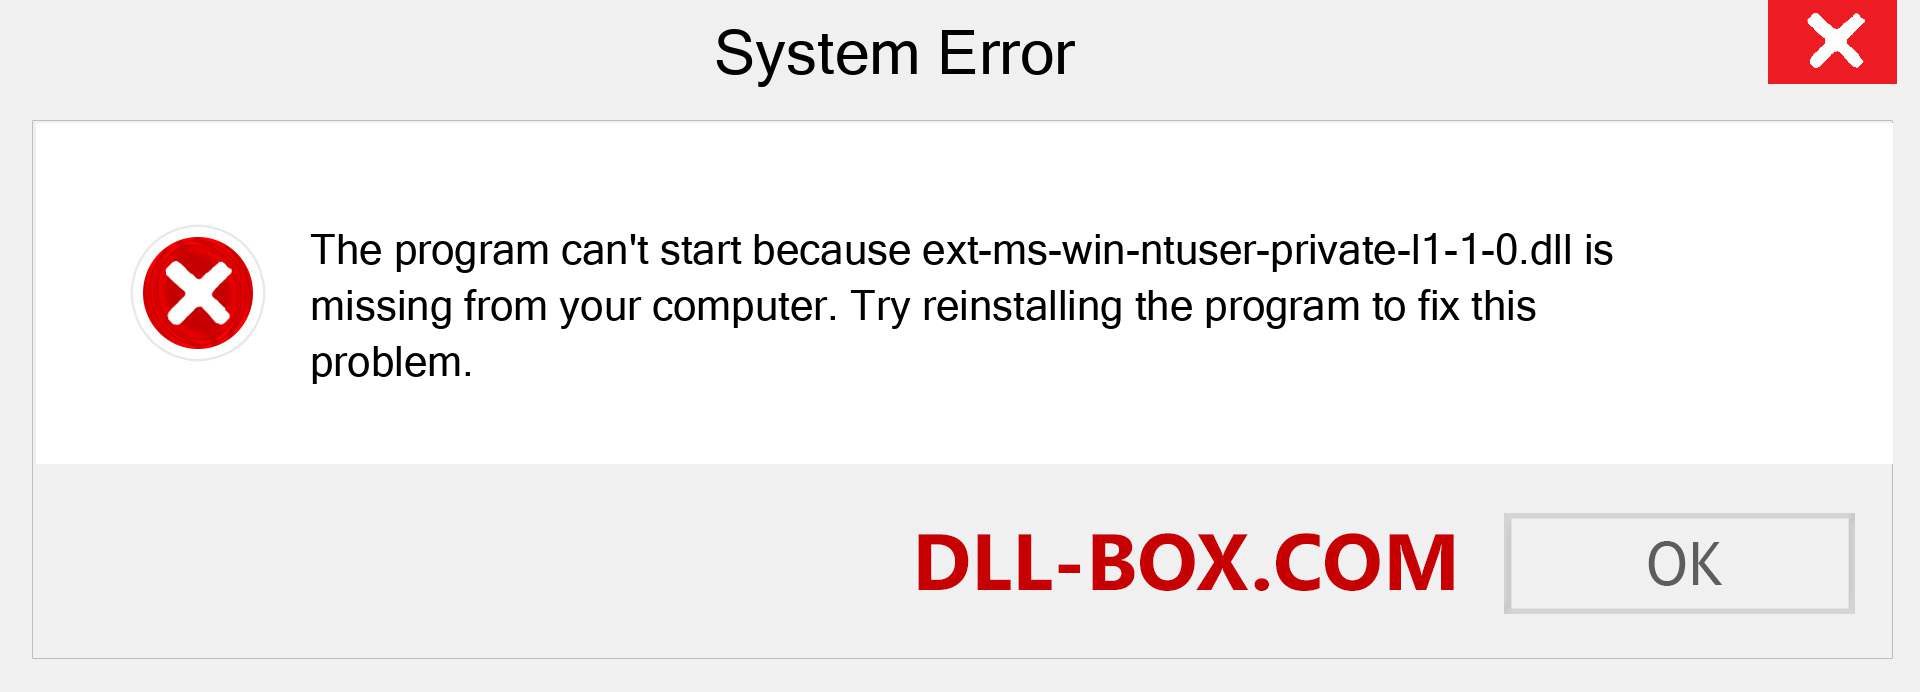  ext-ms-win-ntuser-private-l1-1-0.dll file is missing?. Download for Windows 7, 8, 10 - Fix  ext-ms-win-ntuser-private-l1-1-0 dll Missing Error on Windows, photos, images